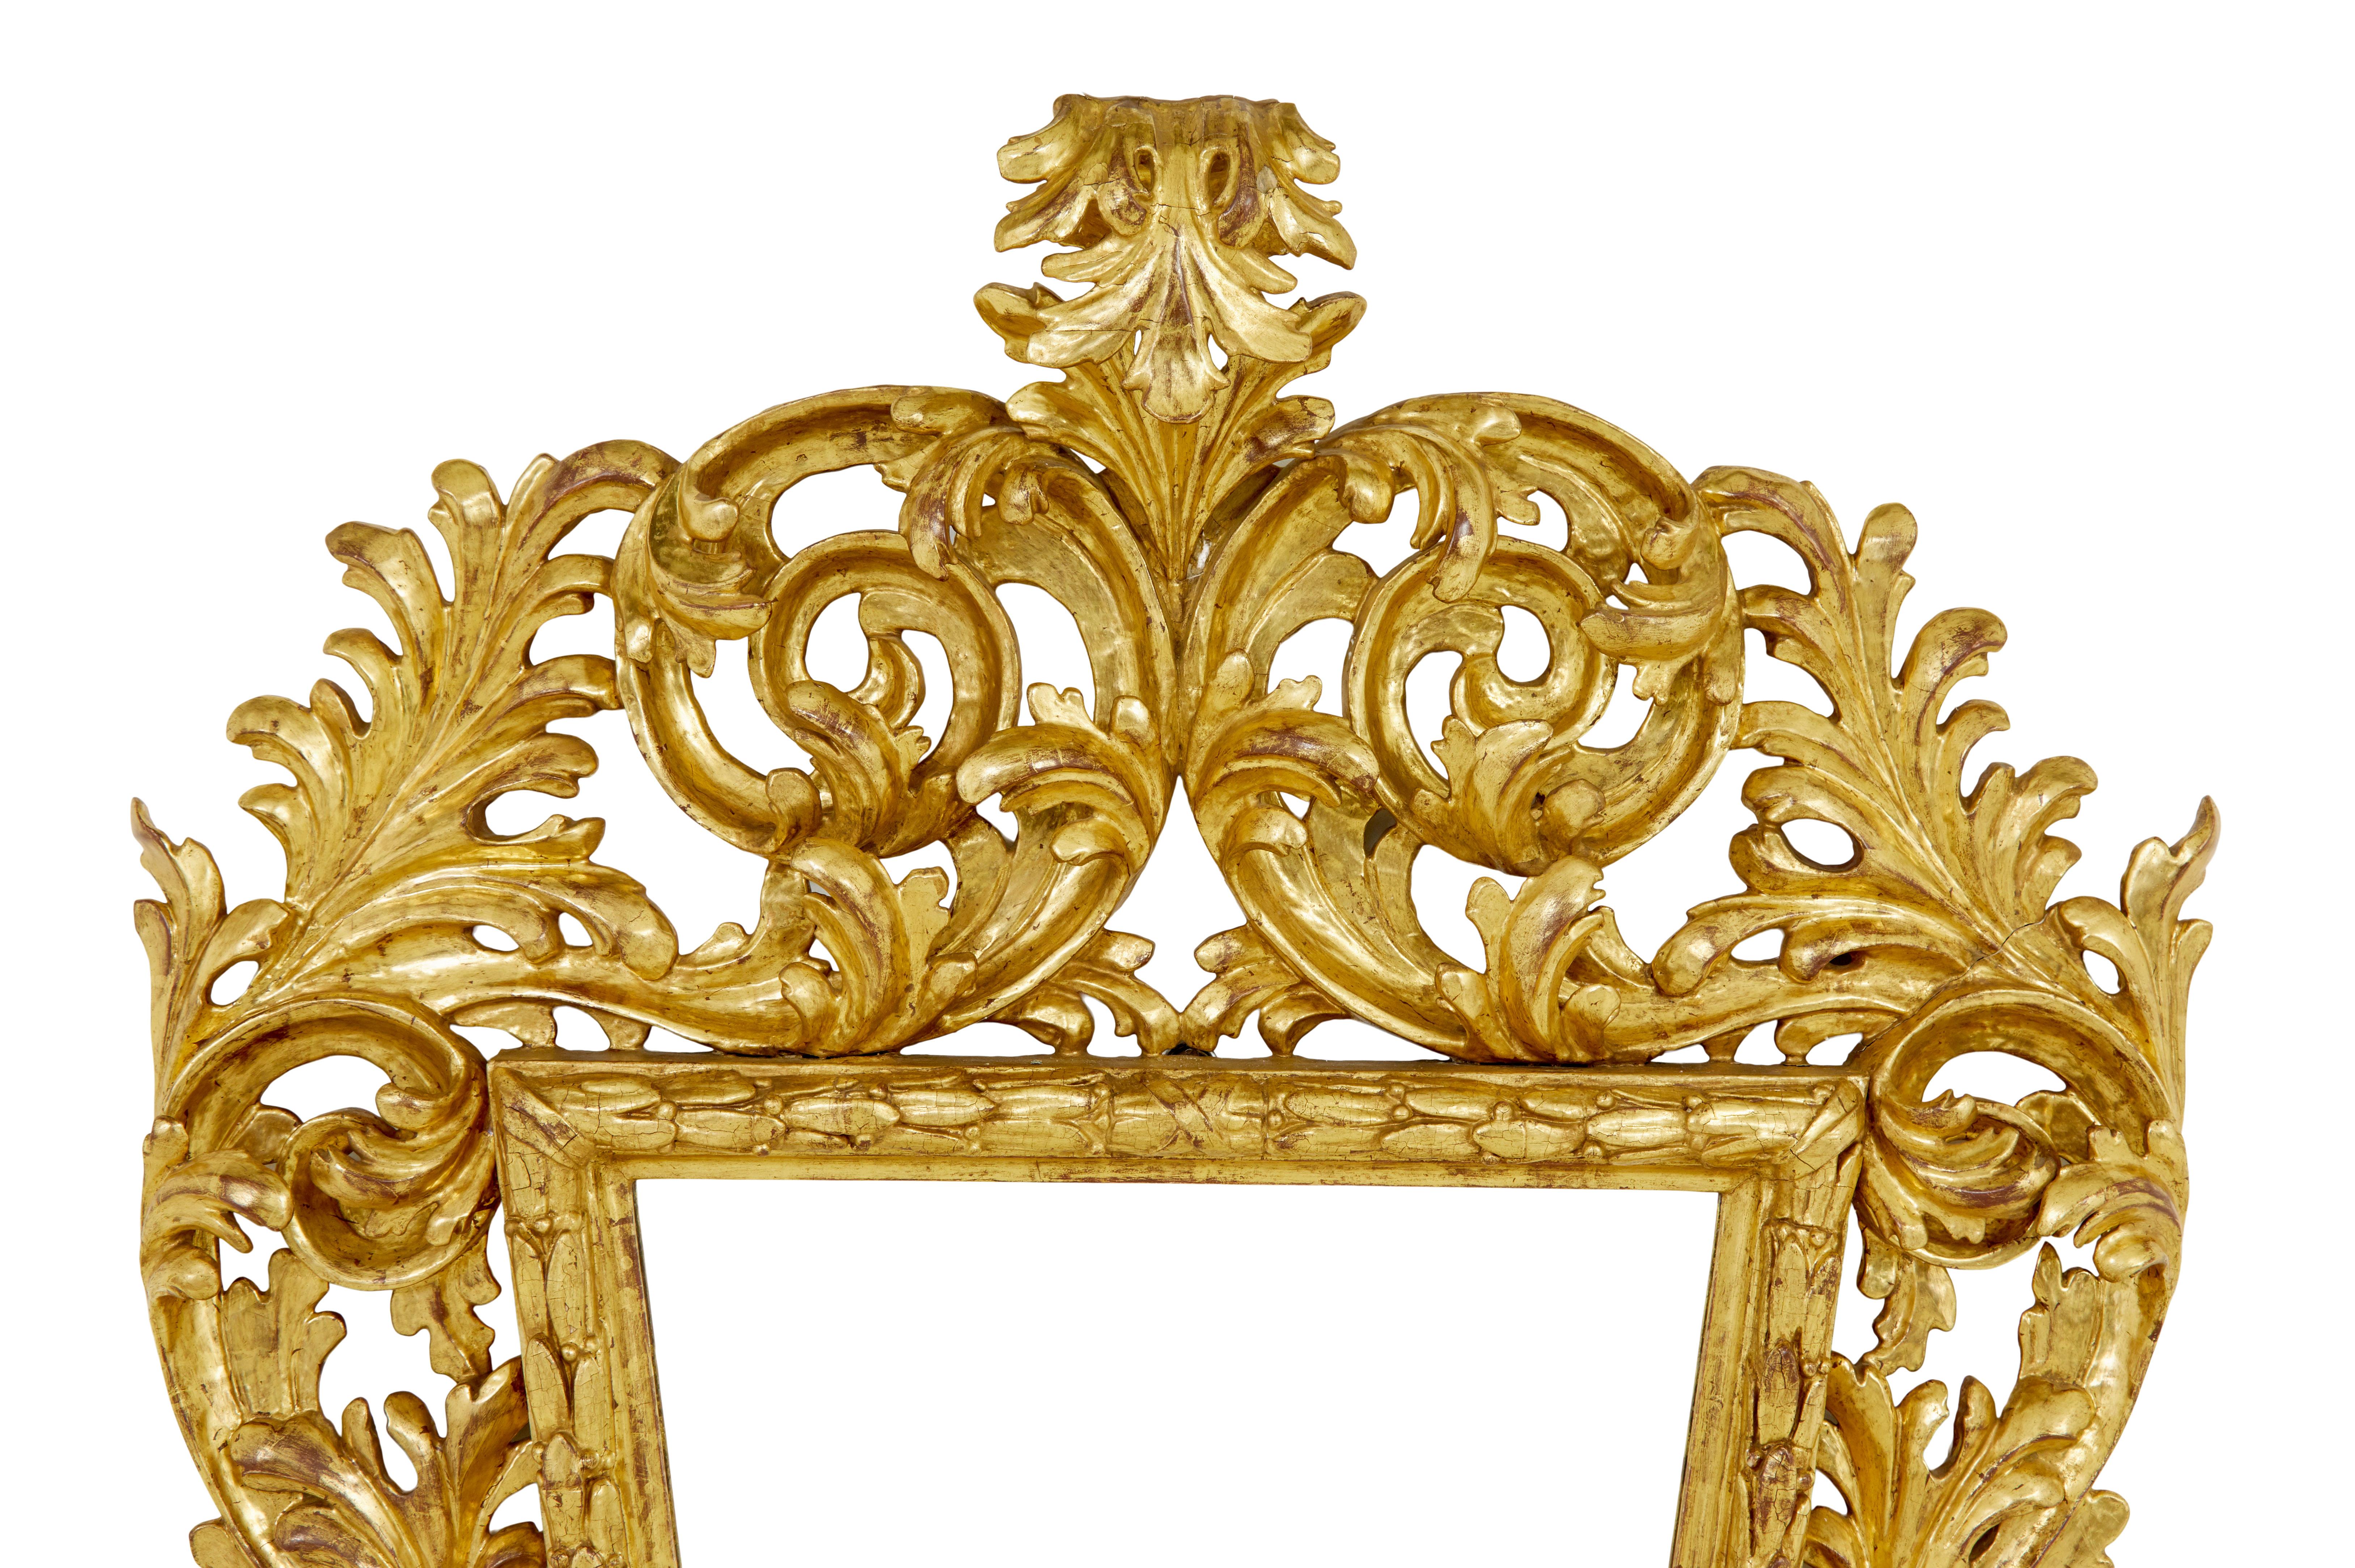 18th century carved Italian rococo giltwood mirror, circa 1730.

Superb quality rococo period giltwood mirror of large proportions. Profusely carved frame with plenty of depth in the carving. Swags to the top and acanthus leaf surrounding the